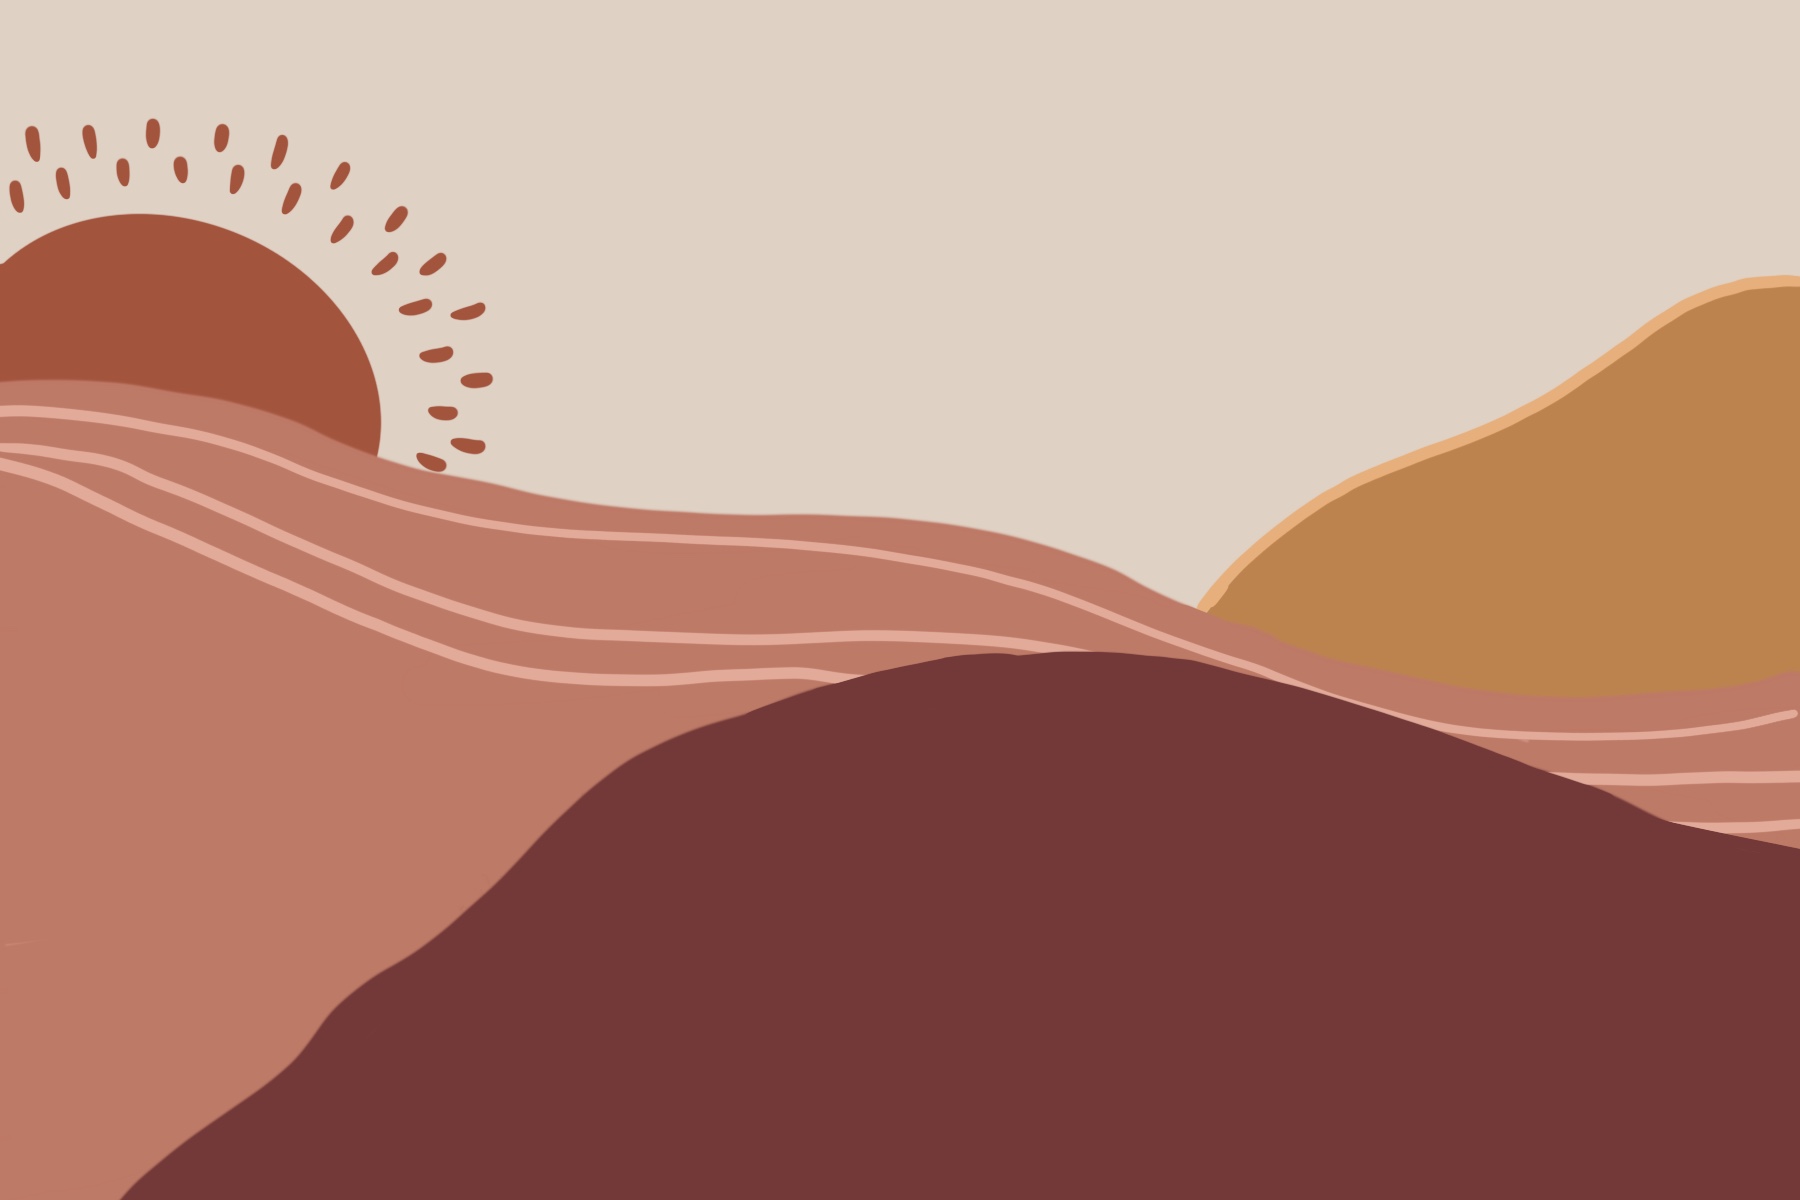 Sand dunes in neutral colors with a setting sun